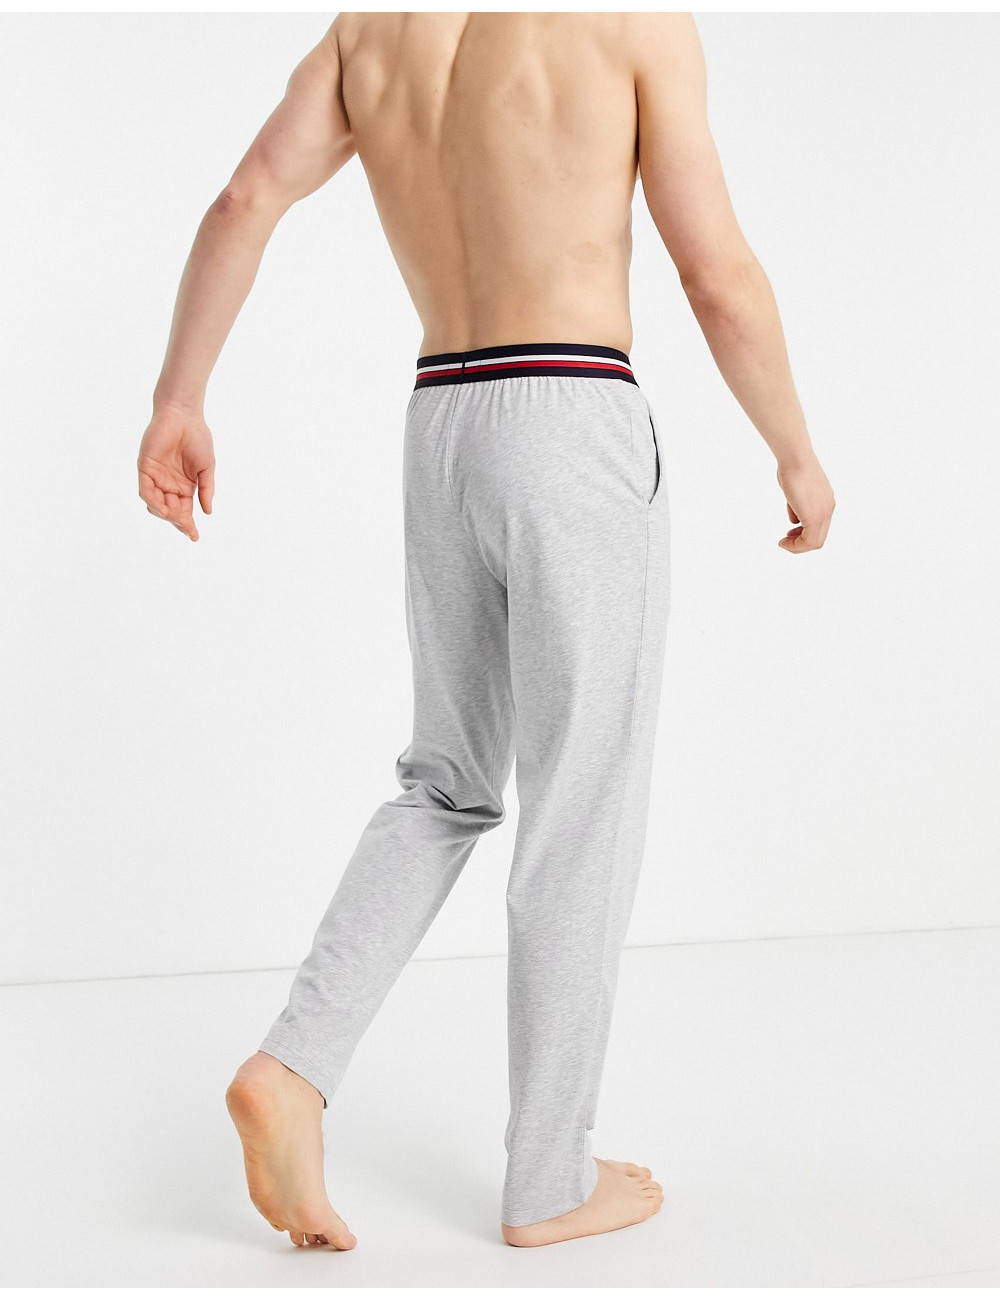 Lacoste lounge jogger with...